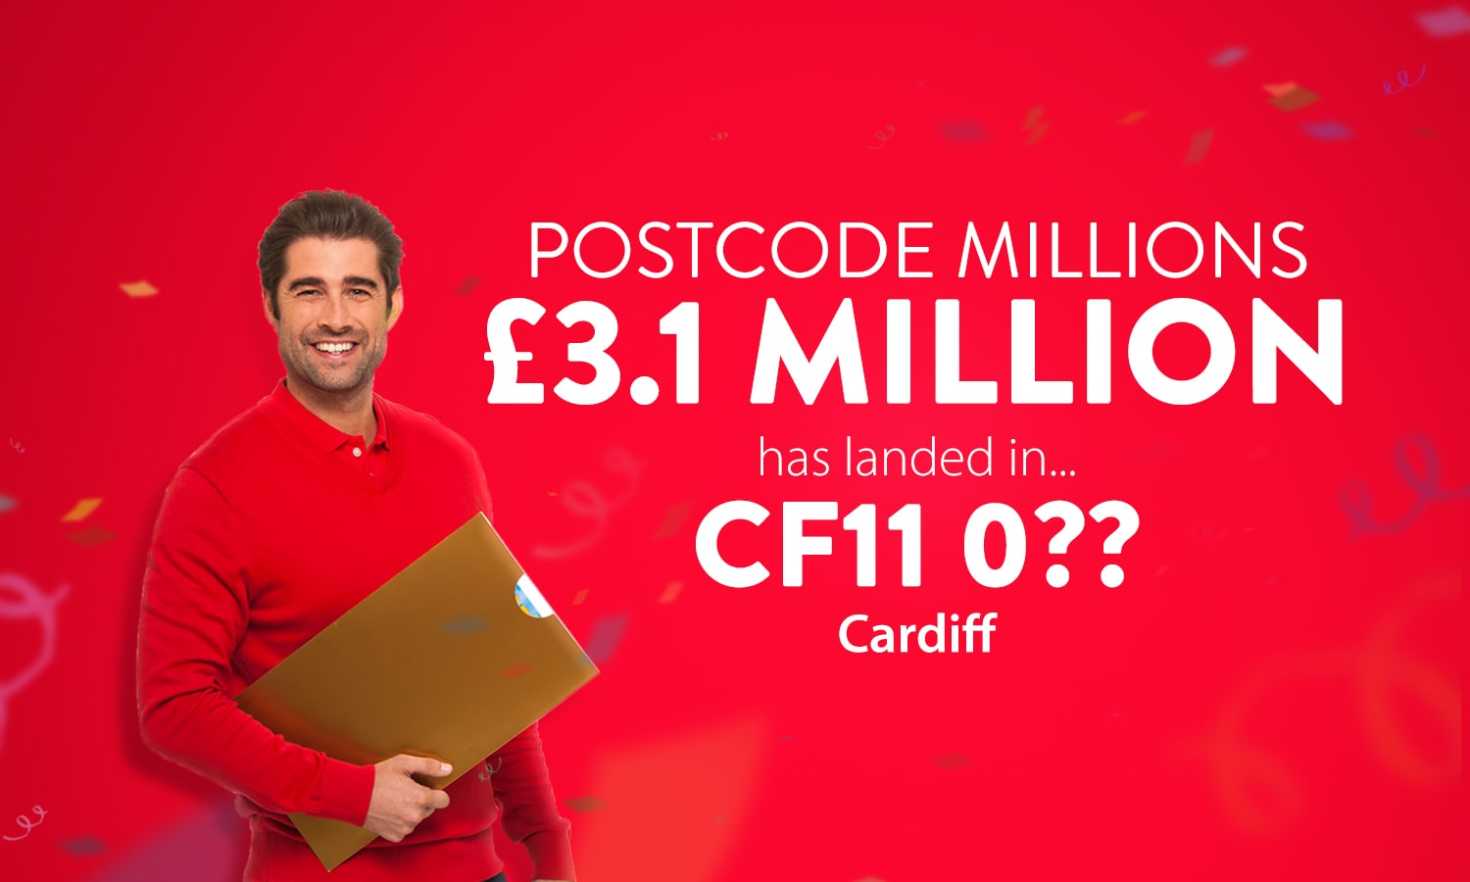 £3.1 Million in prizes is heading to Cardiff for this month's Postcode Millions